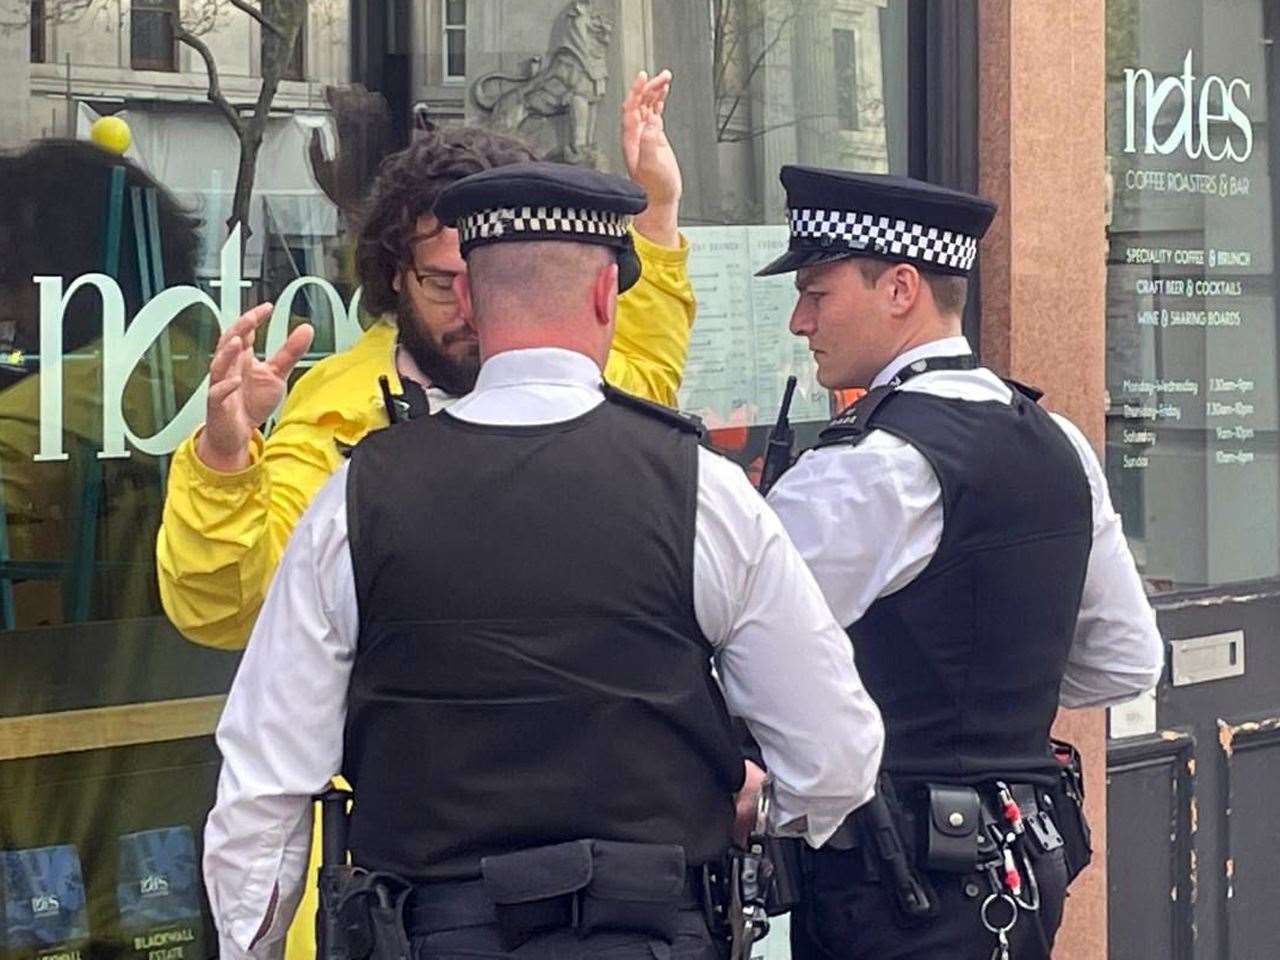 An anti-monarchy protester being arrested in central London on Saturday (Labour for a Republic/PA)